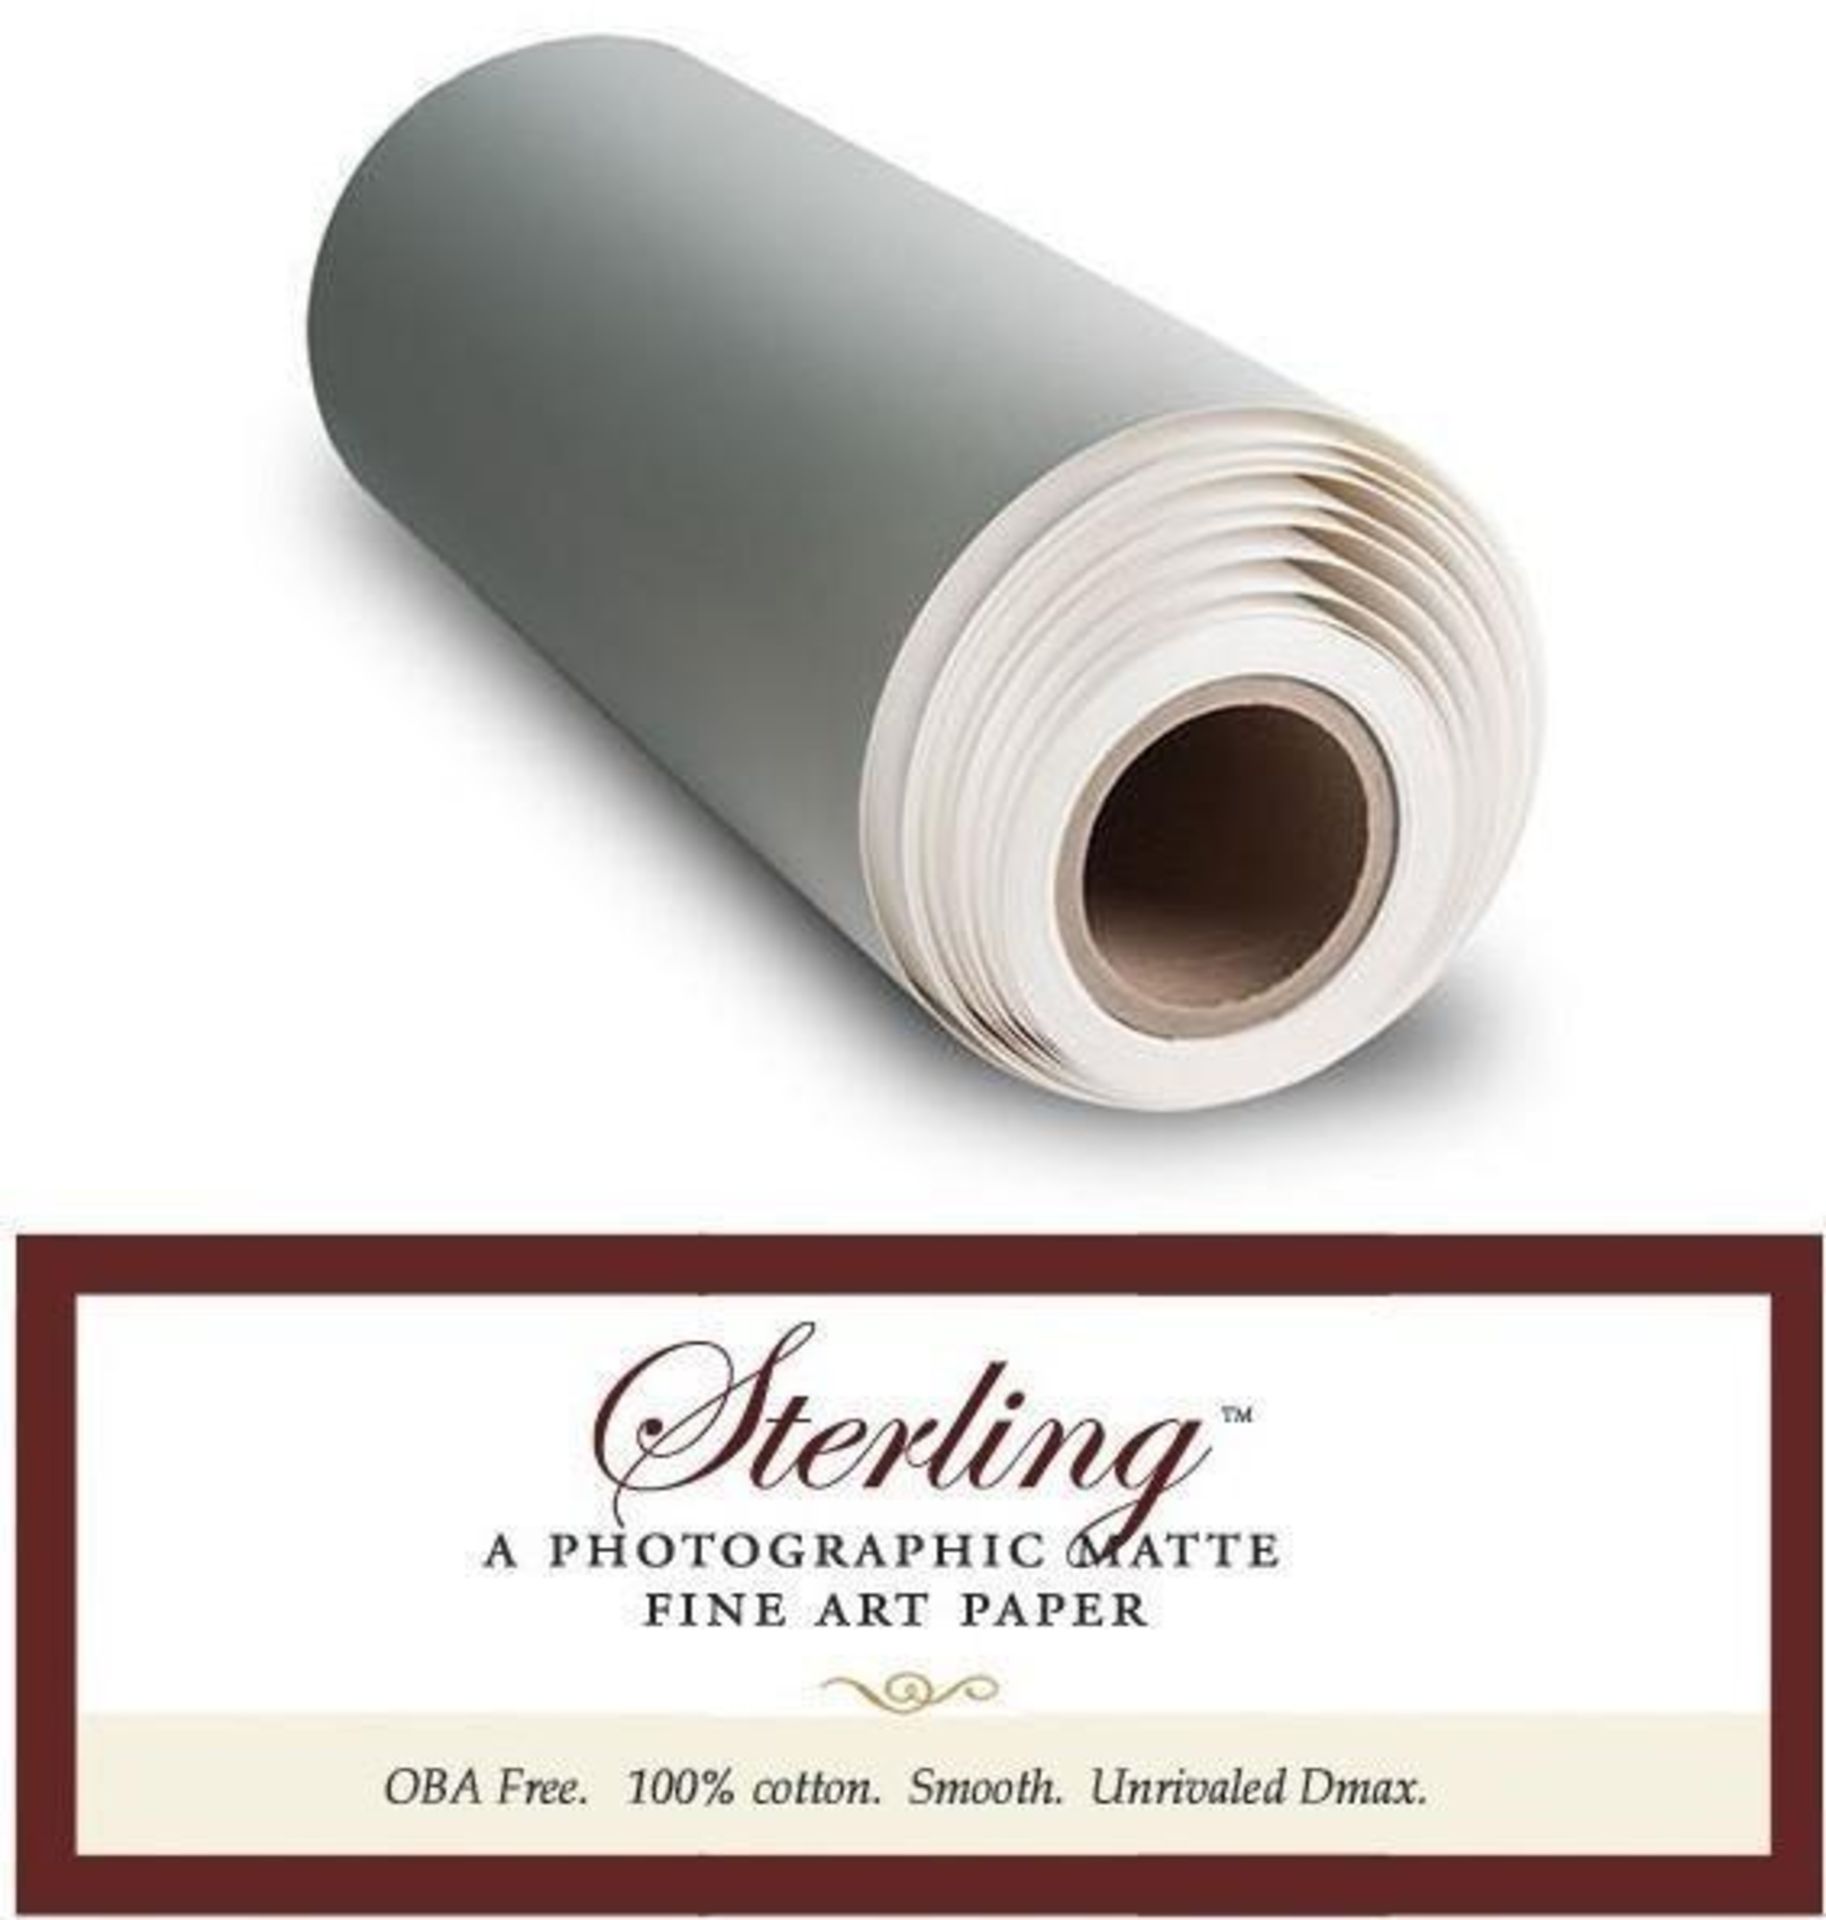 4 x Breathing Colour STERLING Photographic Fine Art Paper - Size 36" x 50' - OBA Free - 100%